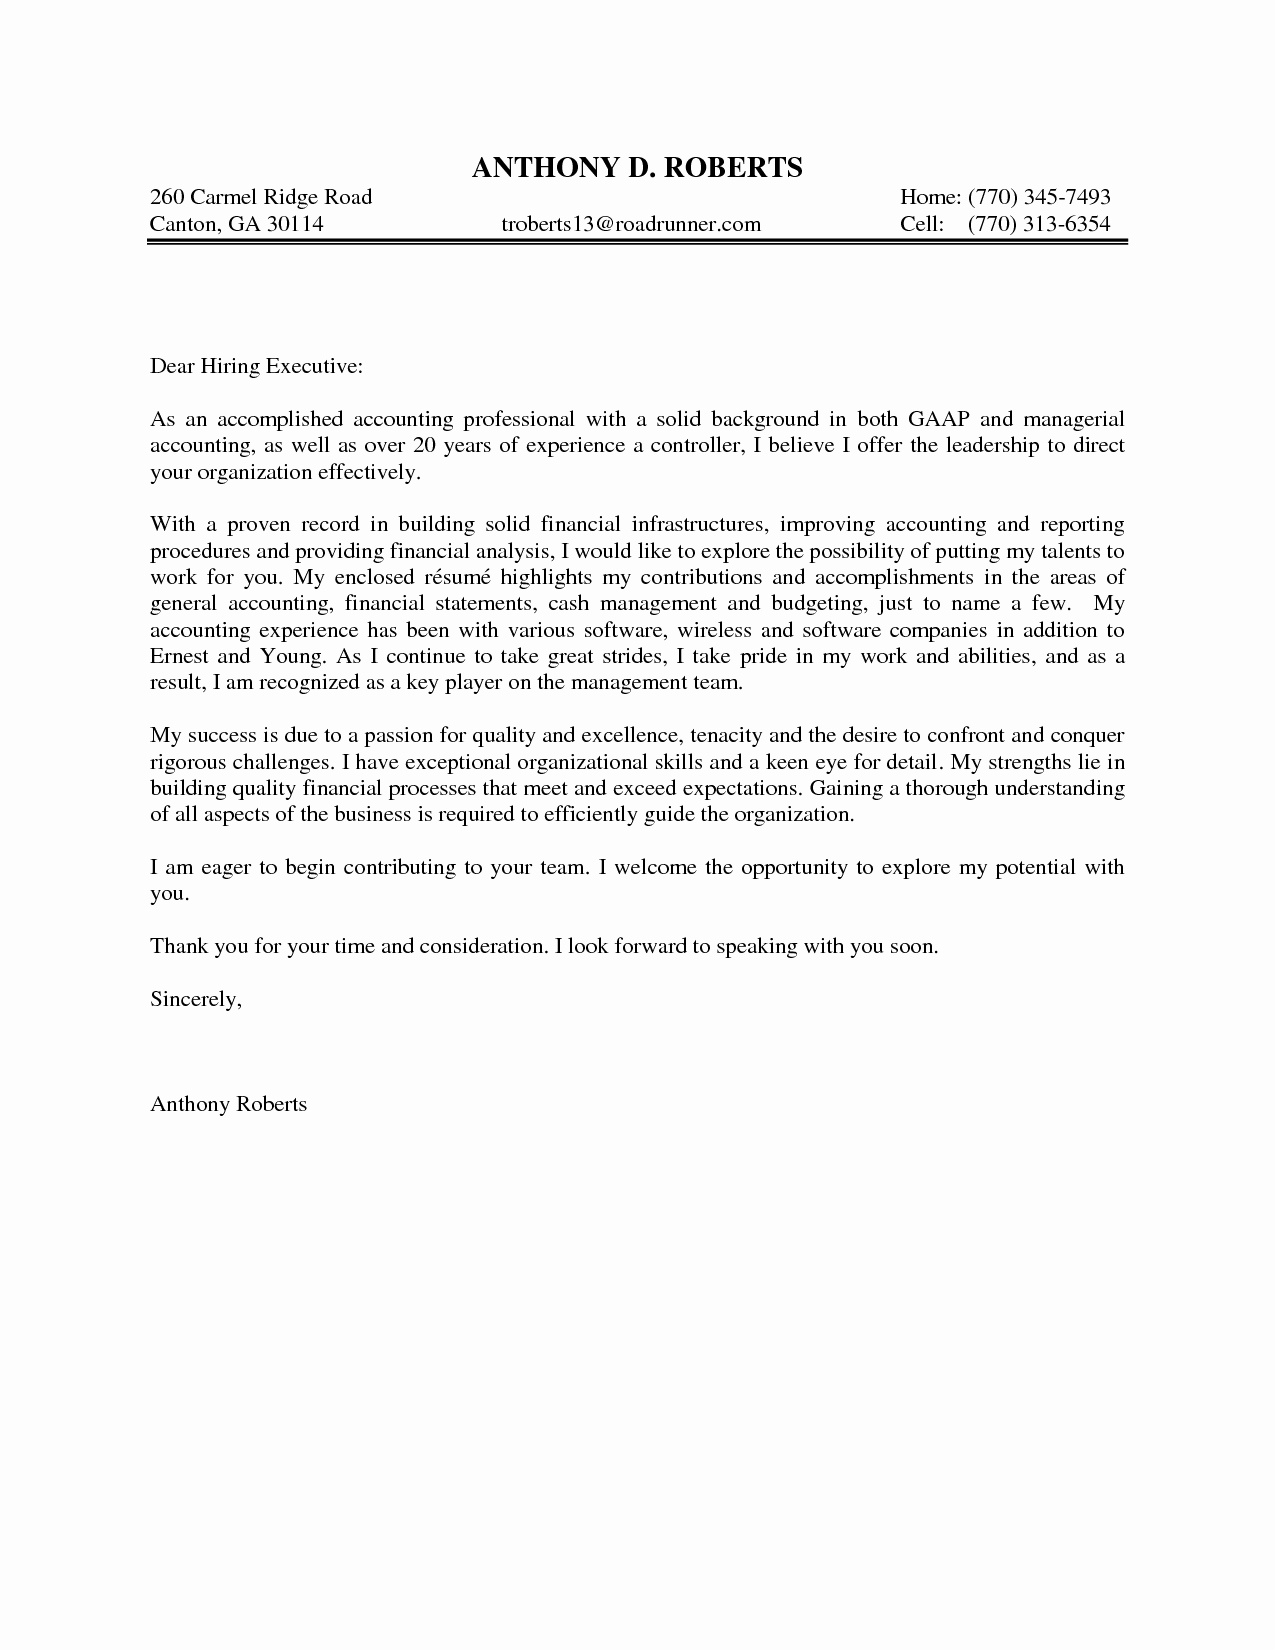 General Cover Letter format Best Template Collection